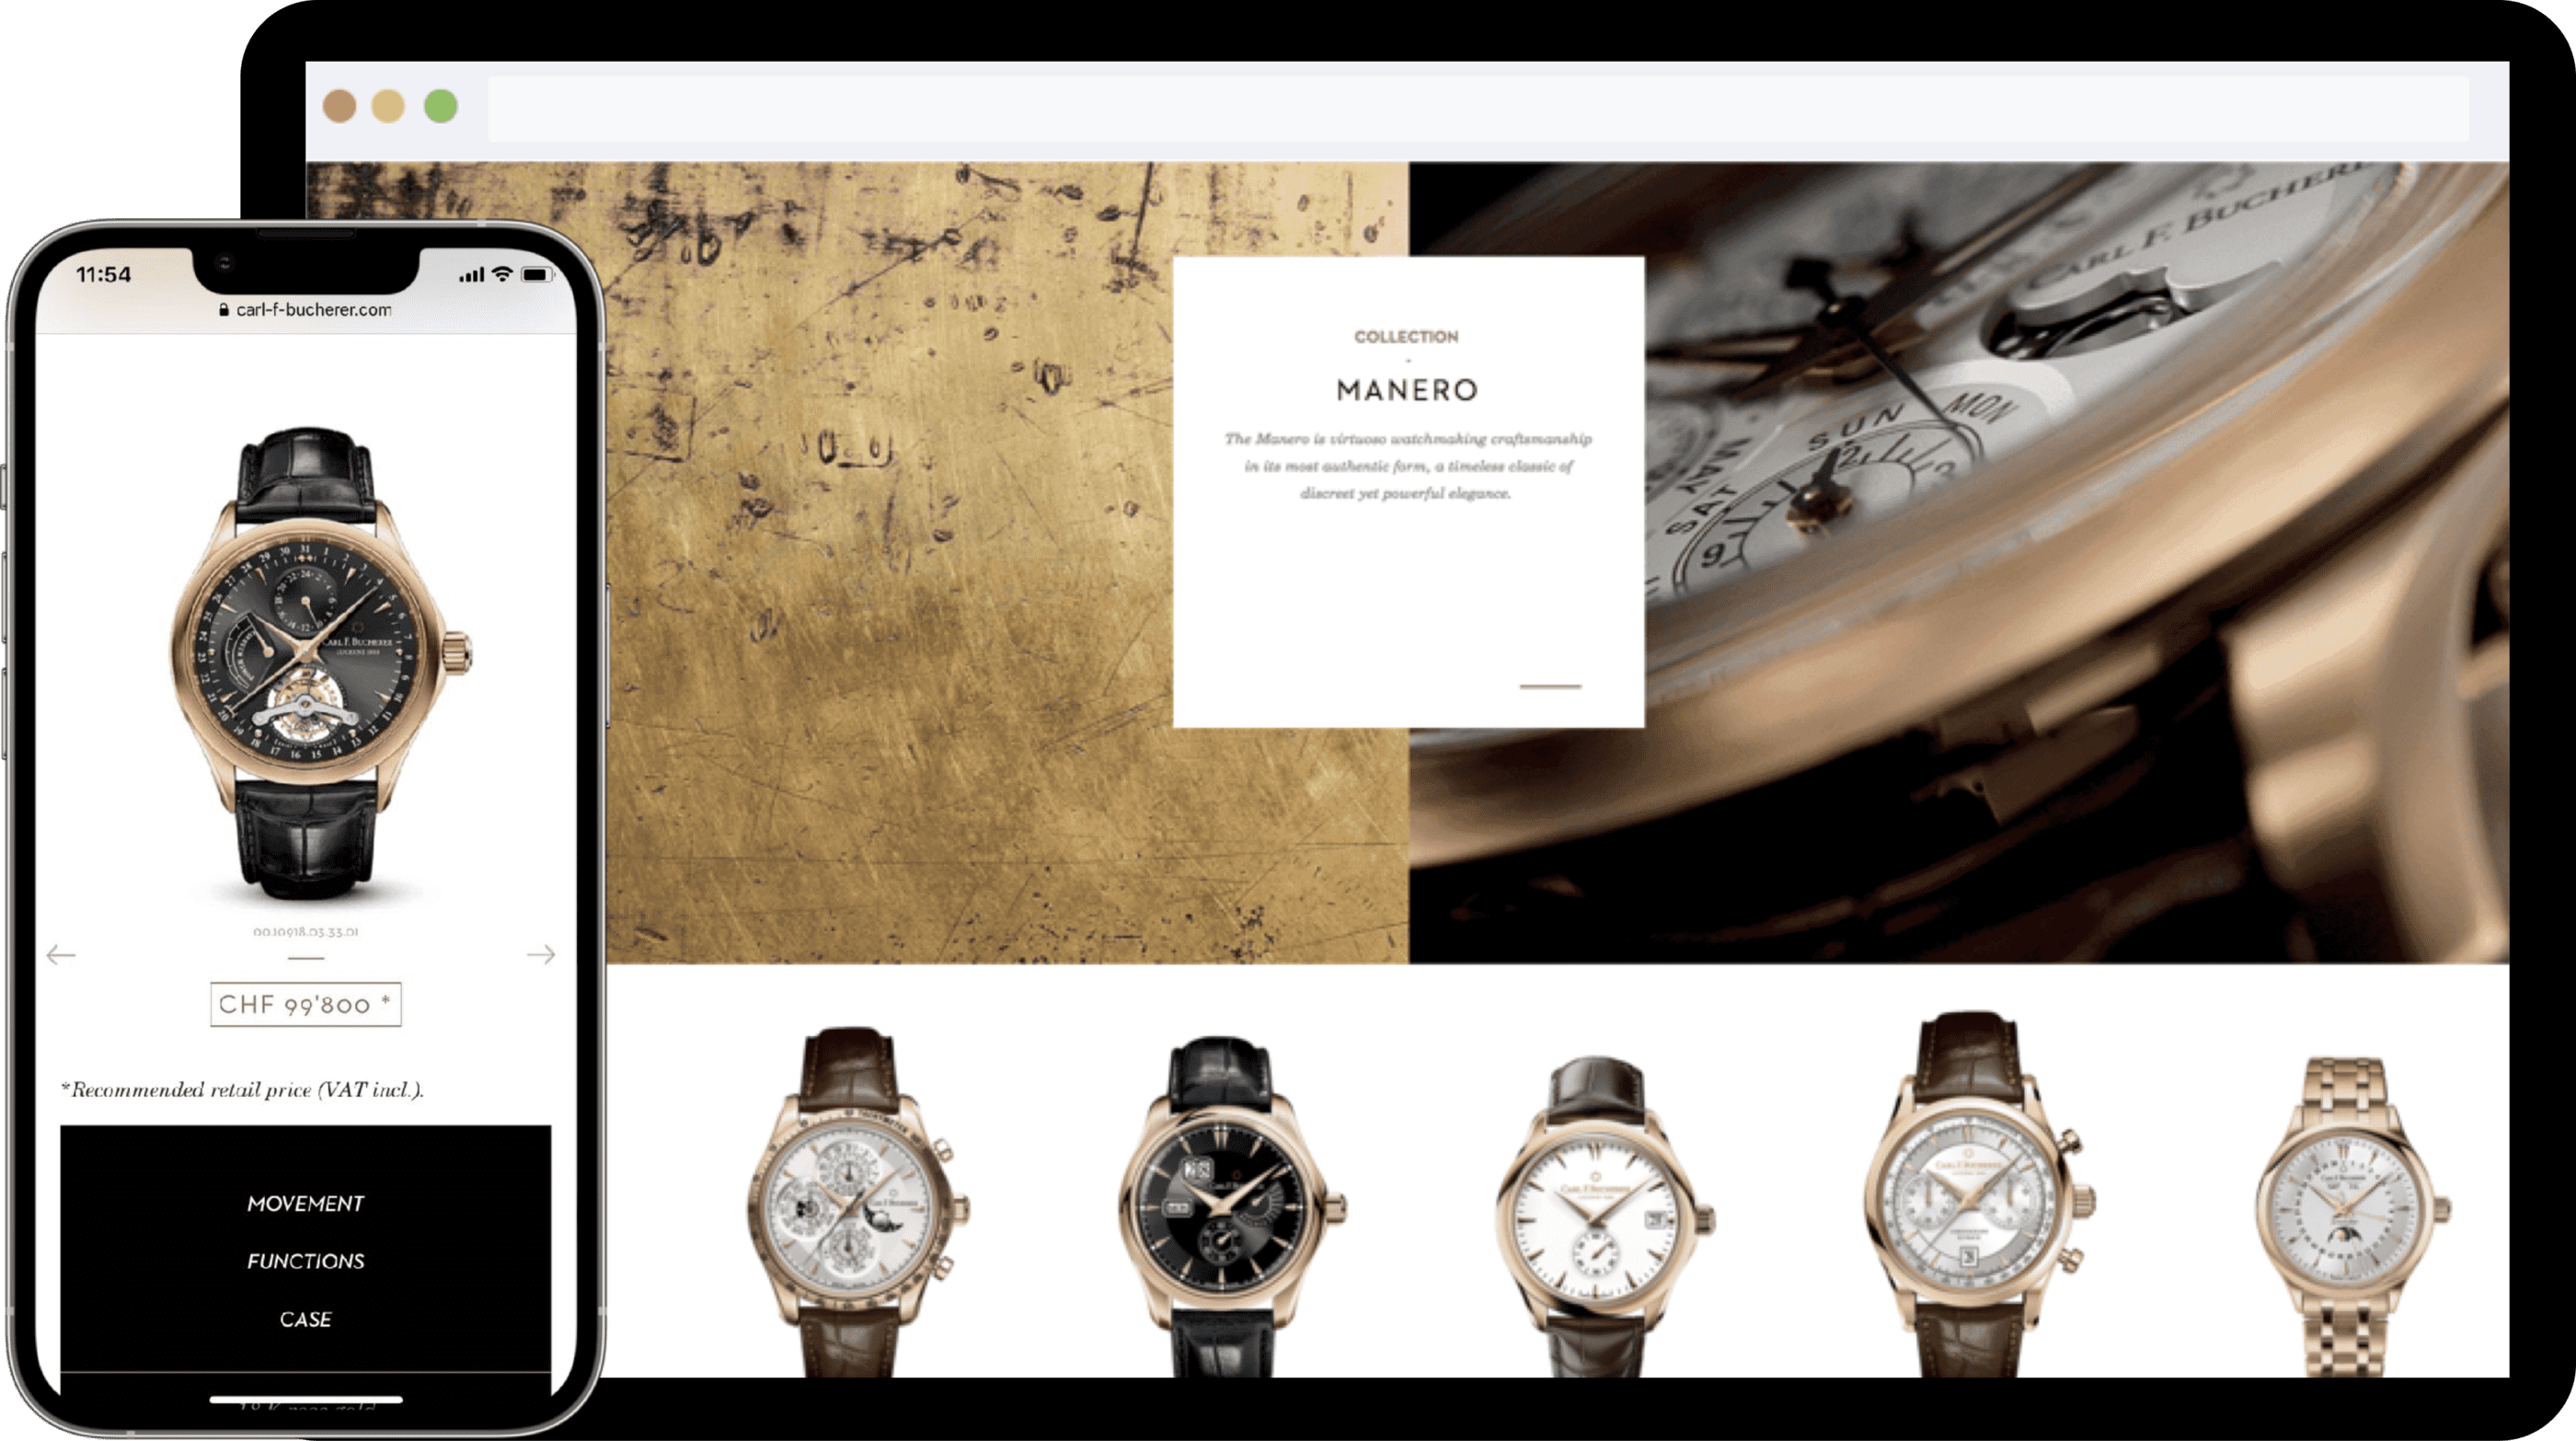 Desktop and mobile mockups of the Carl F. Bucherer website showcasing how the 2 main colors - black and brown yellow - are used to reflect the sense of luxury